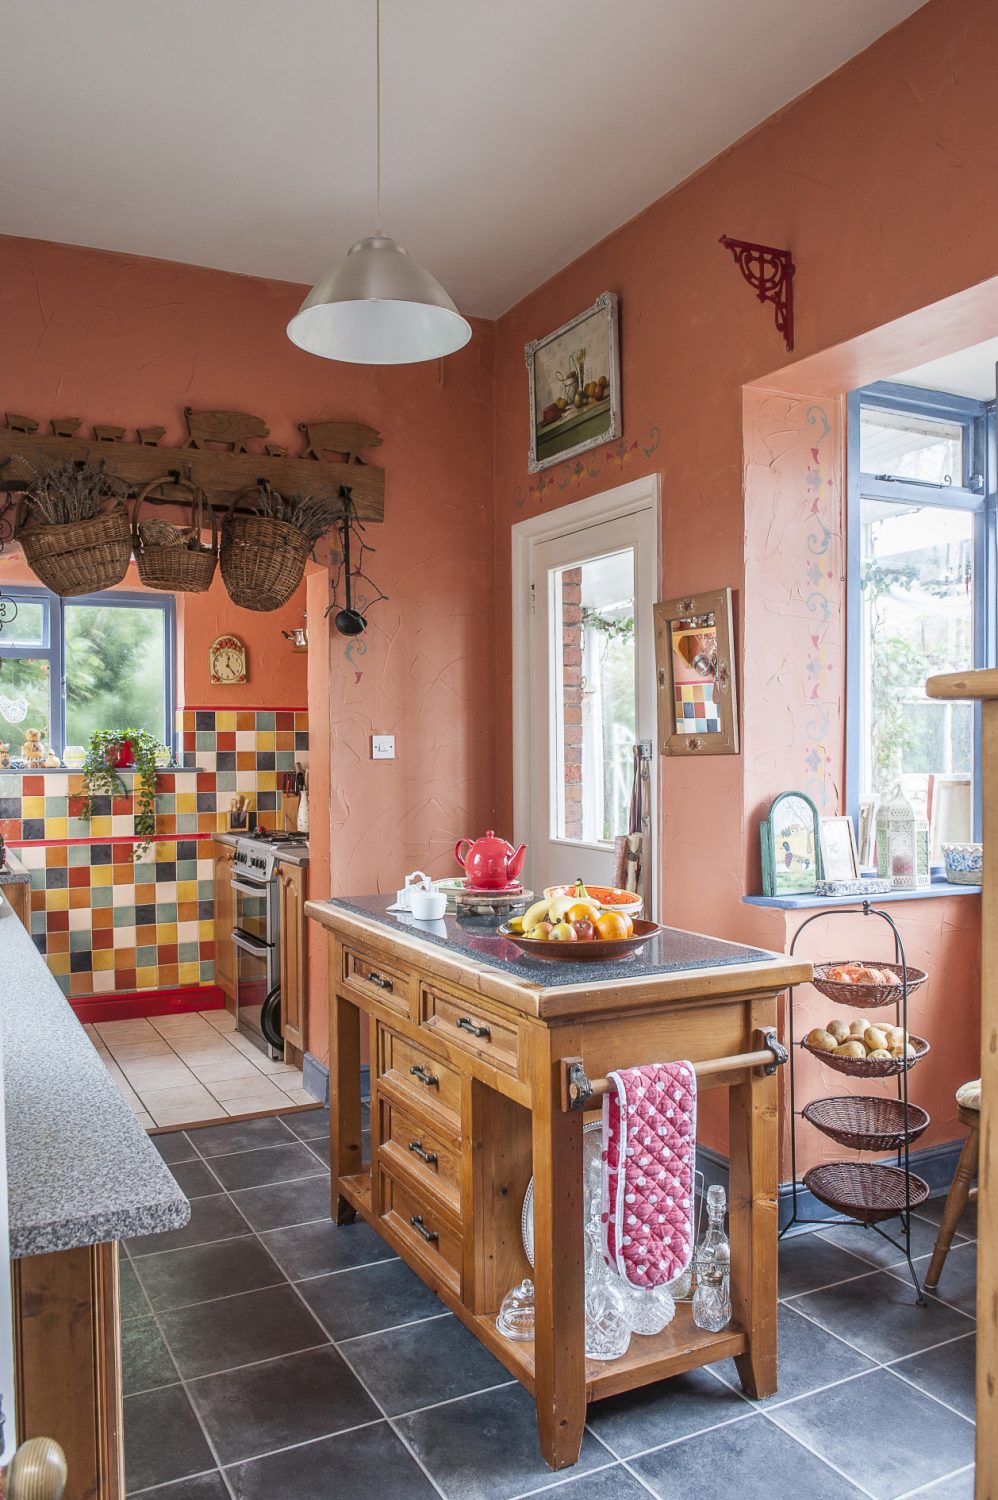 The kitchen is painted and tiled in a Spanish palette of rich terracotta and sunshine yellow